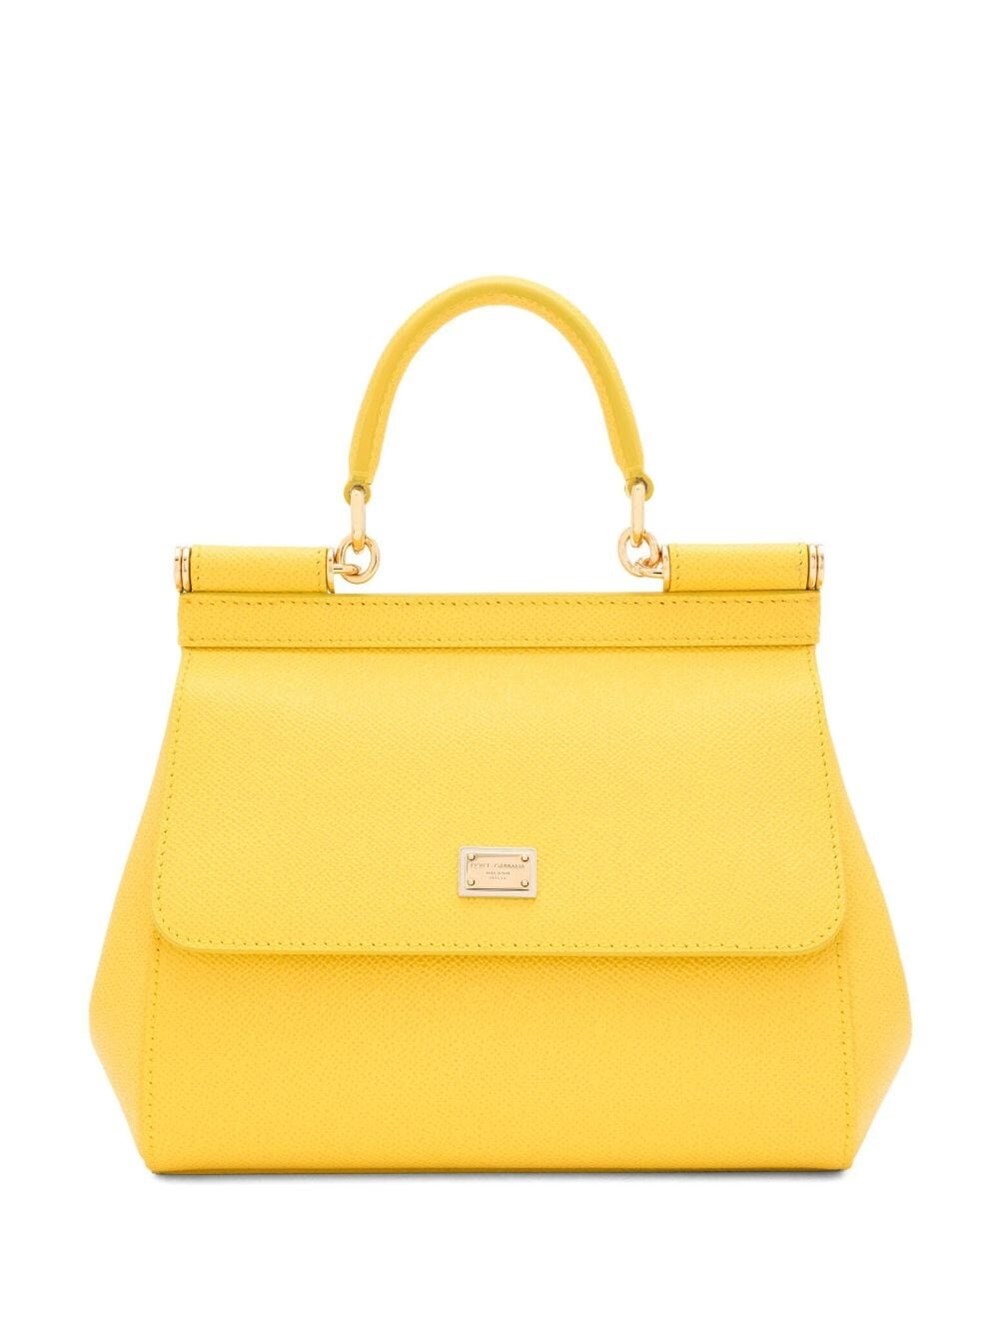 Dolce & Gabbana Sicily Small Bag Stampa Dauphine In Yellow